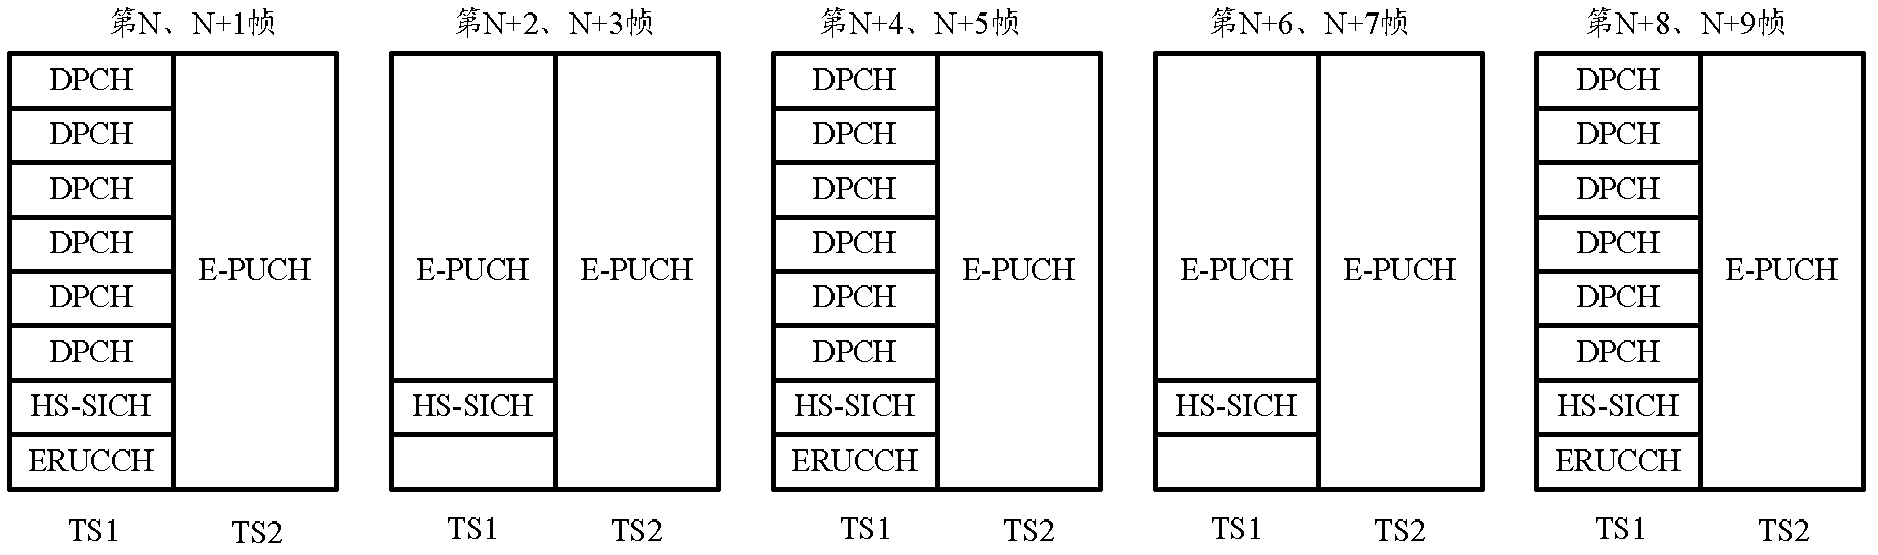 User scheduling method and device